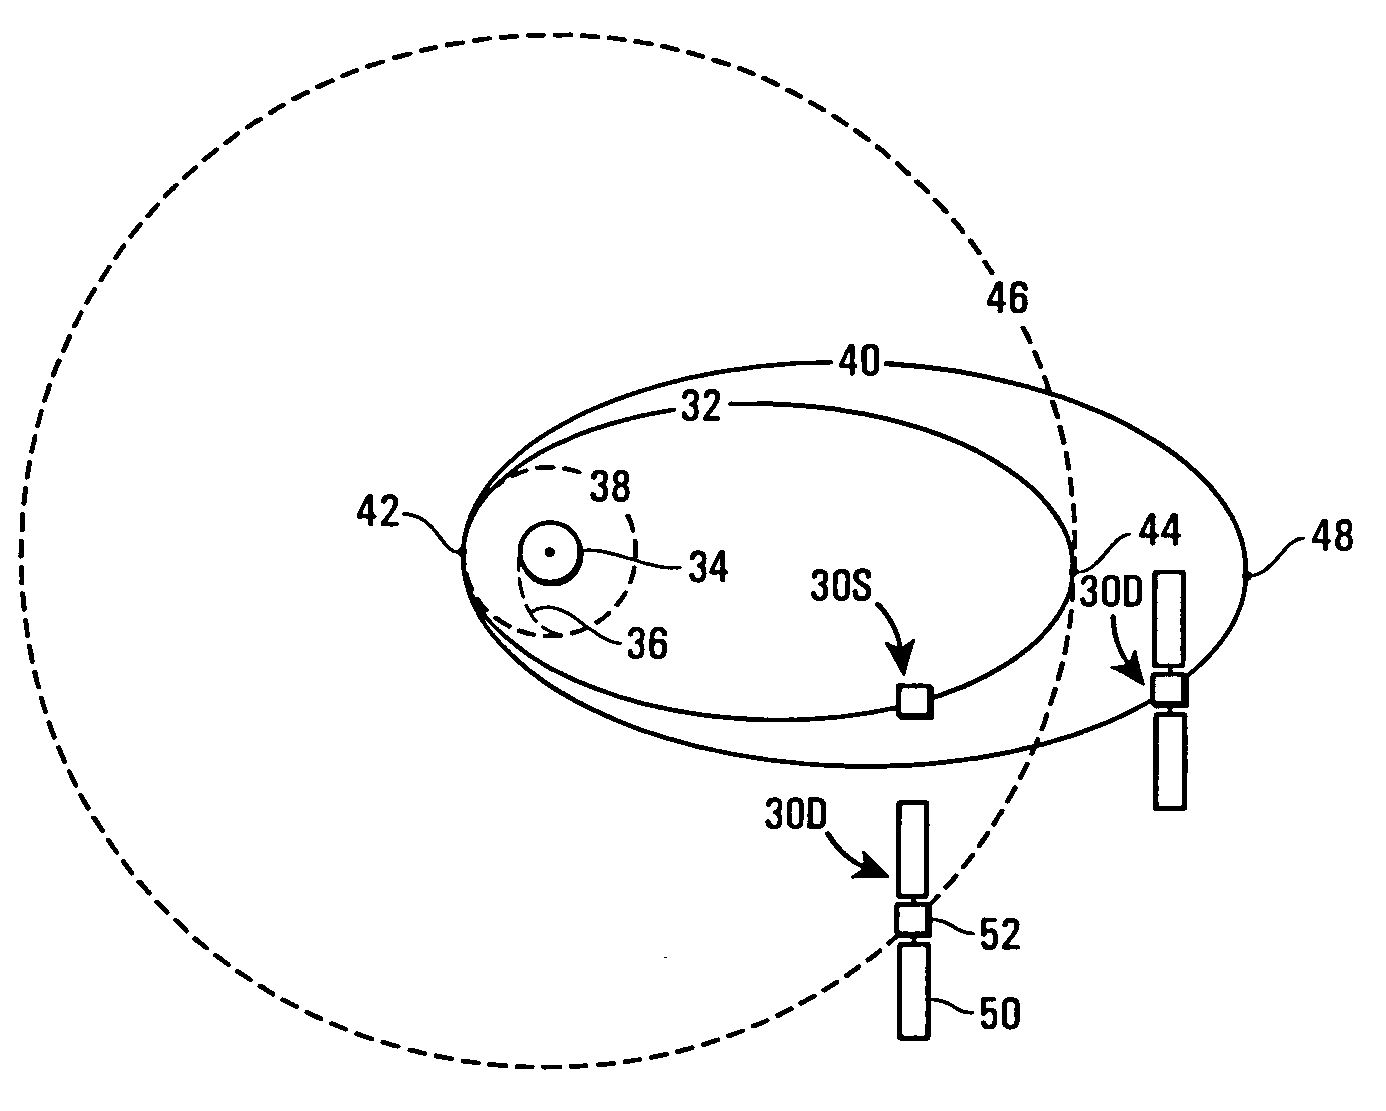 Unified attitude control for spacecraft transfer orbit operations